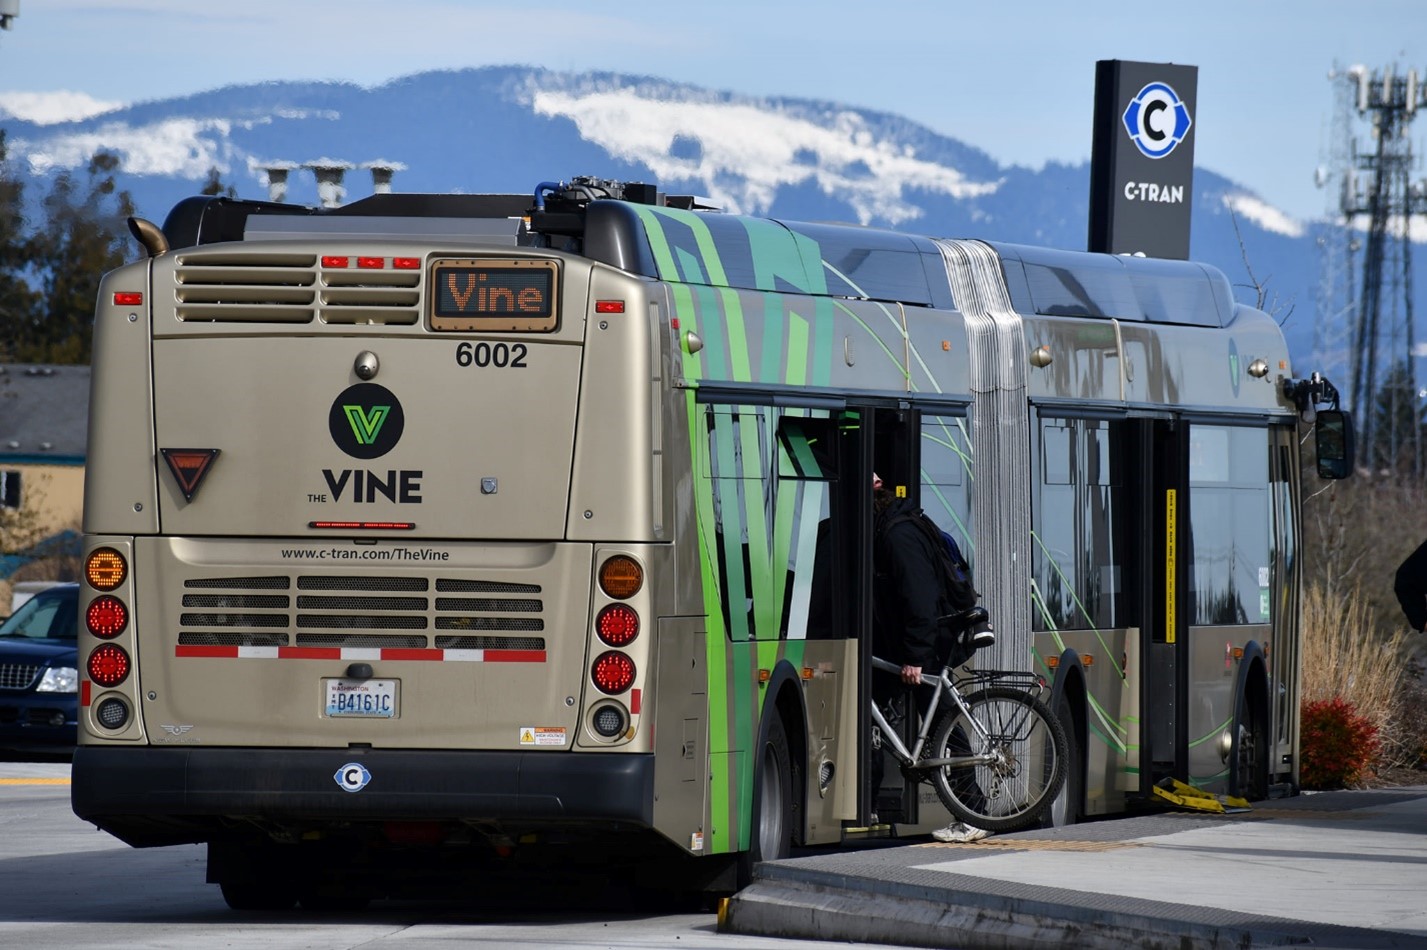 Vine bus parked at the c-tran station while a passenger steps on the bus with his bike. There are mountains in the background of the bus.